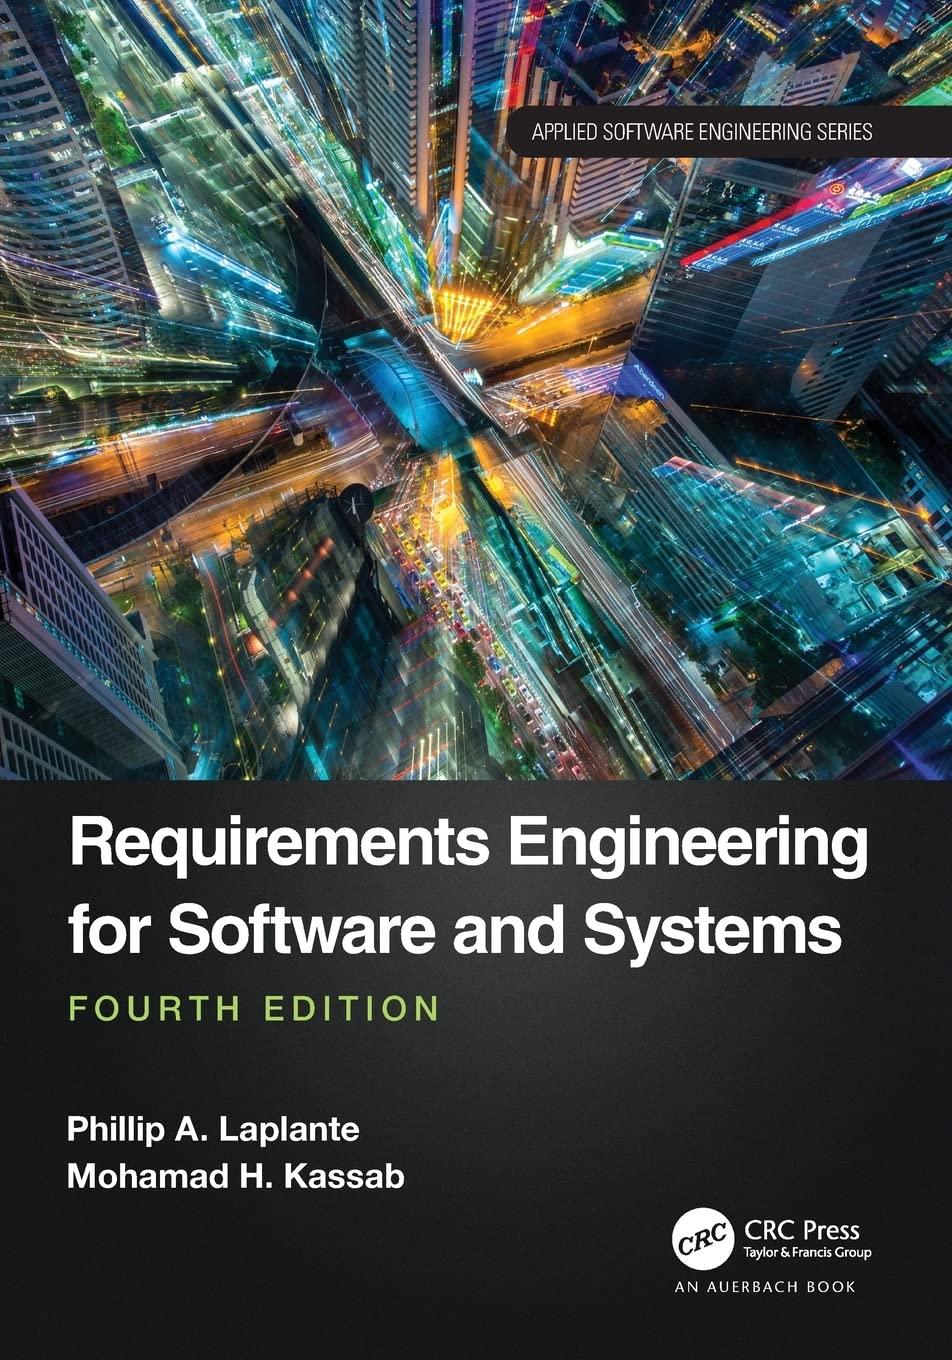 requirements engineering for software and systems 4th edition phillip a. laplante, mohamad kassab 1032275995,